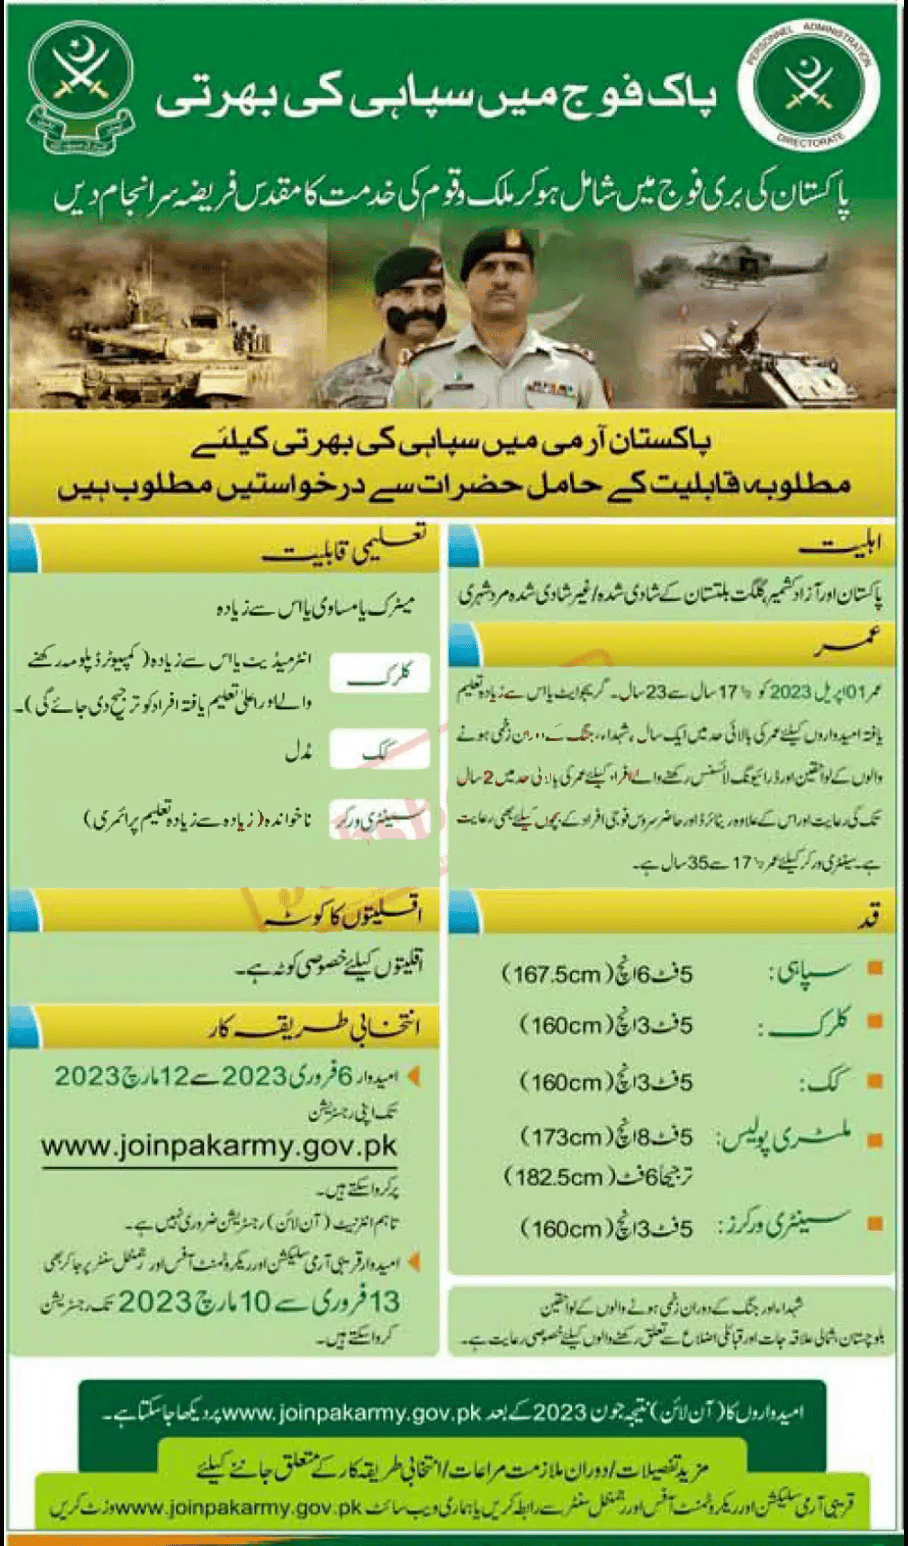 Join Pak Army as Soldier Jobs 2023 – Pak Army Jobs 2023 Online Registration